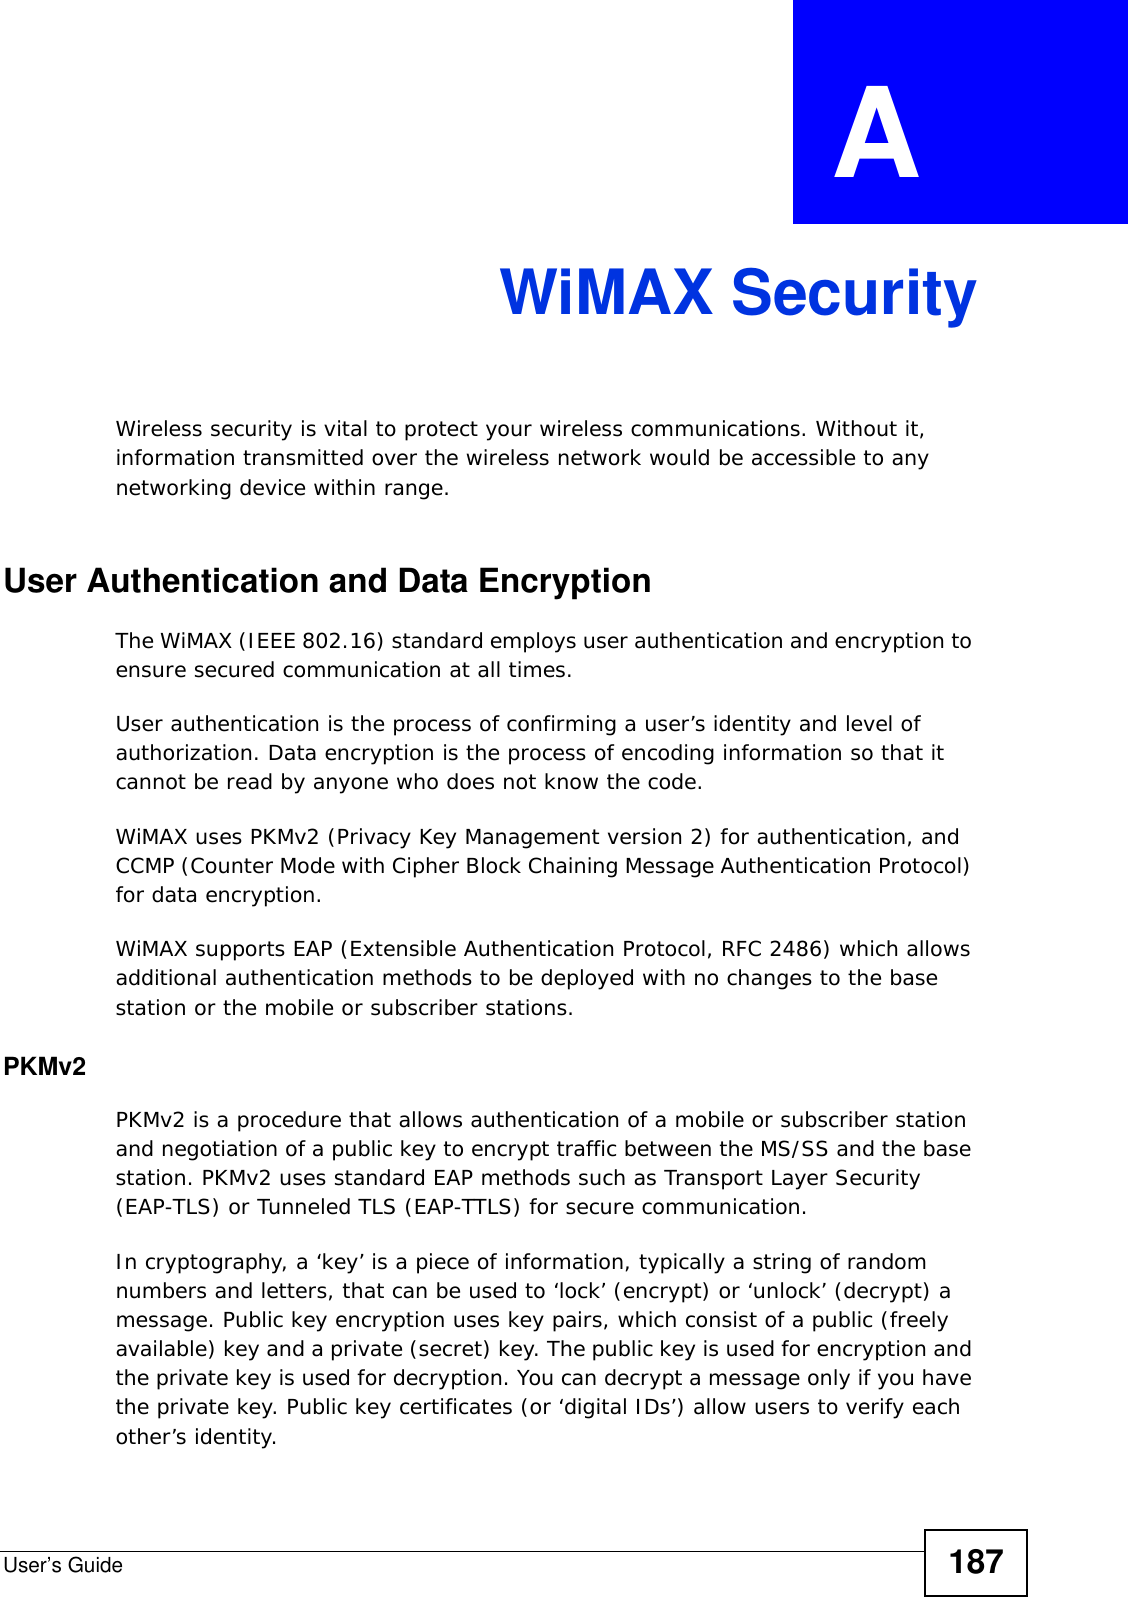 User’s Guide 187APPENDIX  A WiMAX SecurityWireless security is vital to protect your wireless communications. Without it, information transmitted over the wireless network would be accessible to any networking device within range.User Authentication and Data EncryptionThe WiMAX (IEEE 802.16) standard employs user authentication and encryption to ensure secured communication at all times.User authentication is the process of confirming a user’s identity and level of authorization. Data encryption is the process of encoding information so that it cannot be read by anyone who does not know the code. WiMAX uses PKMv2 (Privacy Key Management version 2) for authentication, and CCMP (Counter Mode with Cipher Block Chaining Message Authentication Protocol) for data encryption. WiMAX supports EAP (Extensible Authentication Protocol, RFC 2486) which allows additional authentication methods to be deployed with no changes to the base station or the mobile or subscriber stations.PKMv2PKMv2 is a procedure that allows authentication of a mobile or subscriber station and negotiation of a public key to encrypt traffic between the MS/SS and the base station. PKMv2 uses standard EAP methods such as Transport Layer Security (EAP-TLS) or Tunneled TLS (EAP-TTLS) for secure communication. In cryptography, a ‘key’ is a piece of information, typically a string of random numbers and letters, that can be used to ‘lock’ (encrypt) or ‘unlock’ (decrypt) a message. Public key encryption uses key pairs, which consist of a public (freely available) key and a private (secret) key. The public key is used for encryption and the private key is used for decryption. You can decrypt a message only if you have the private key. Public key certificates (or ‘digital IDs’) allow users to verify each other’s identity. 